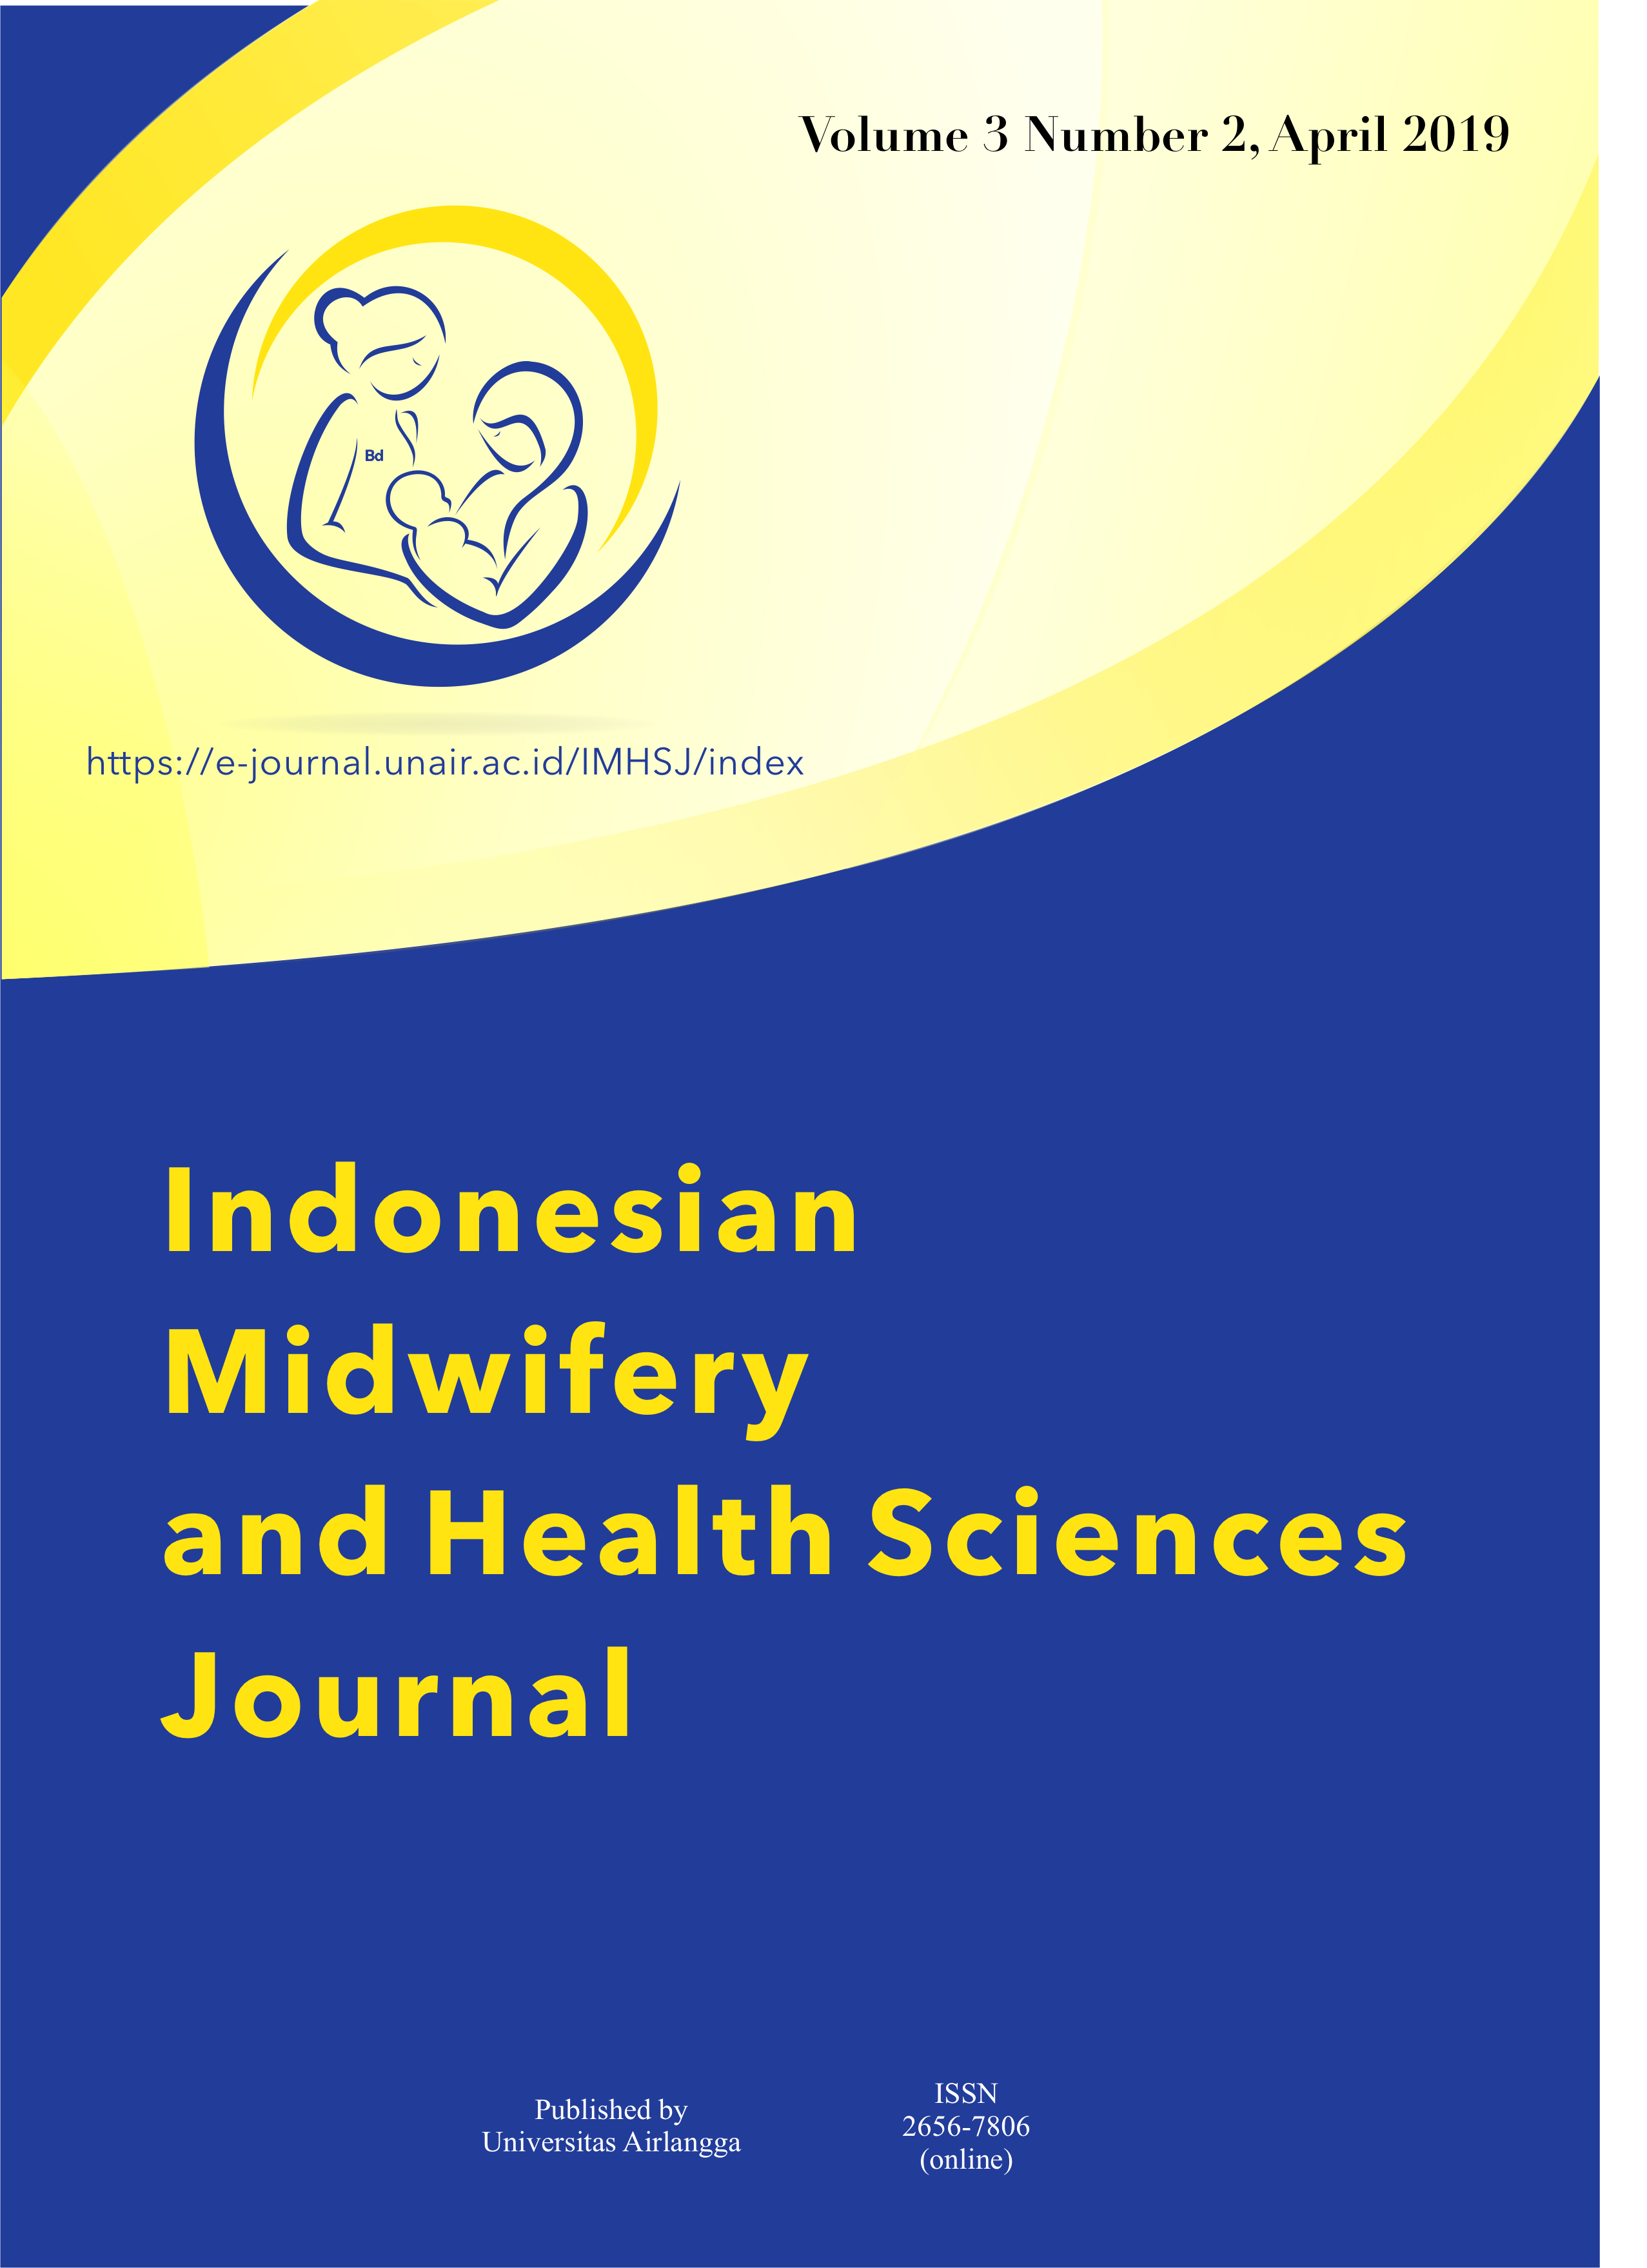 						View Vol. 3 No. 2 (2019): Indonesian Midwifery and Health Sciences Journal, April 2019
					